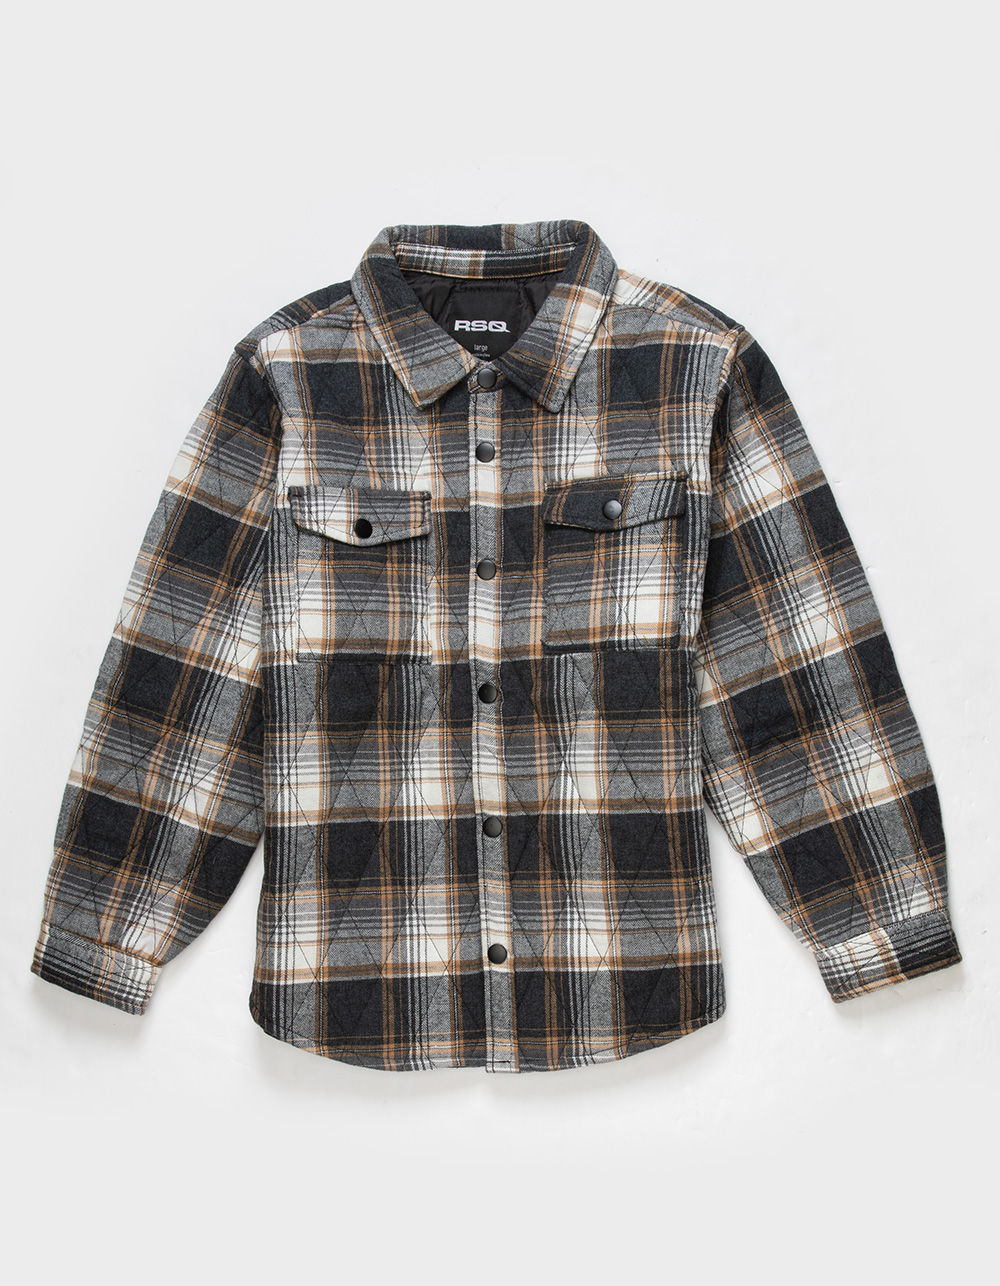 RSQ Boys Quilted Flannel Jacket - GRAY/WHITE | Tillys